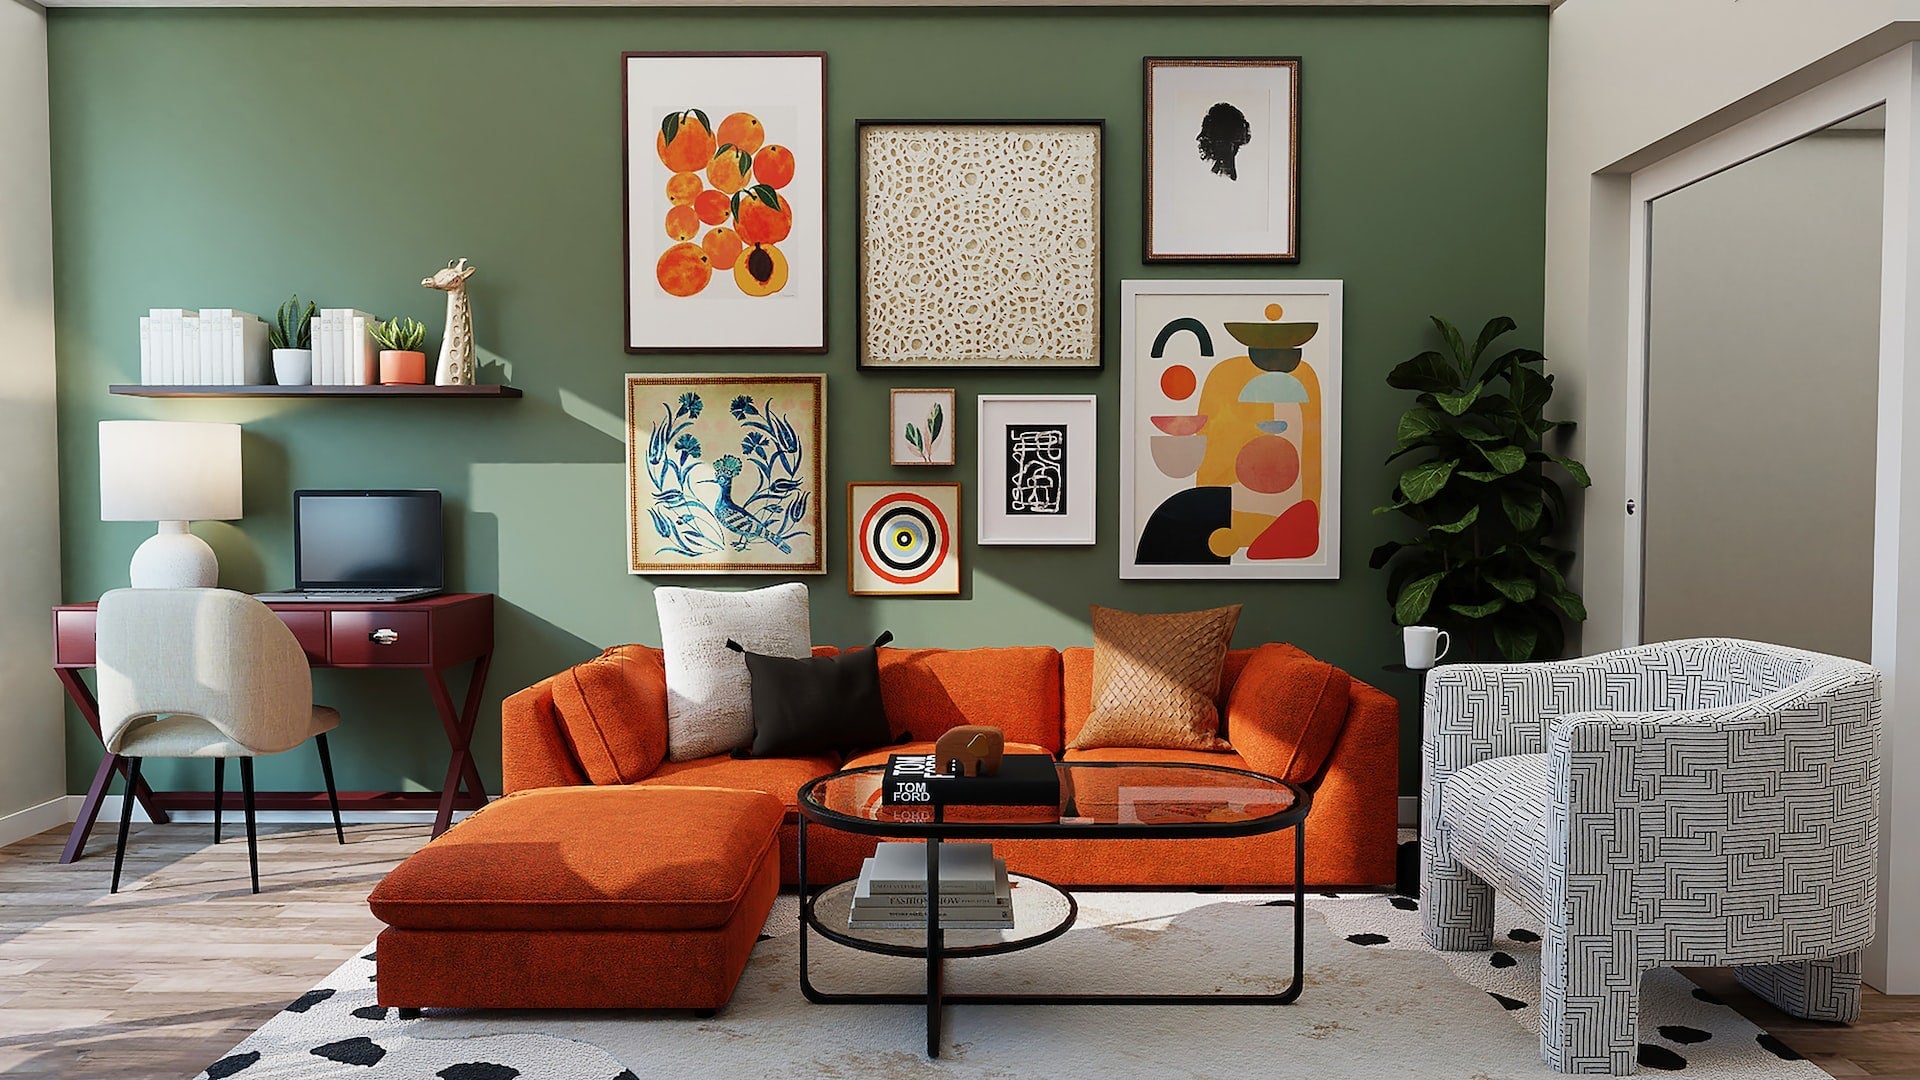 Why Artists Should Study the Art of Designing Living Spaces - BestPaintByNumbers